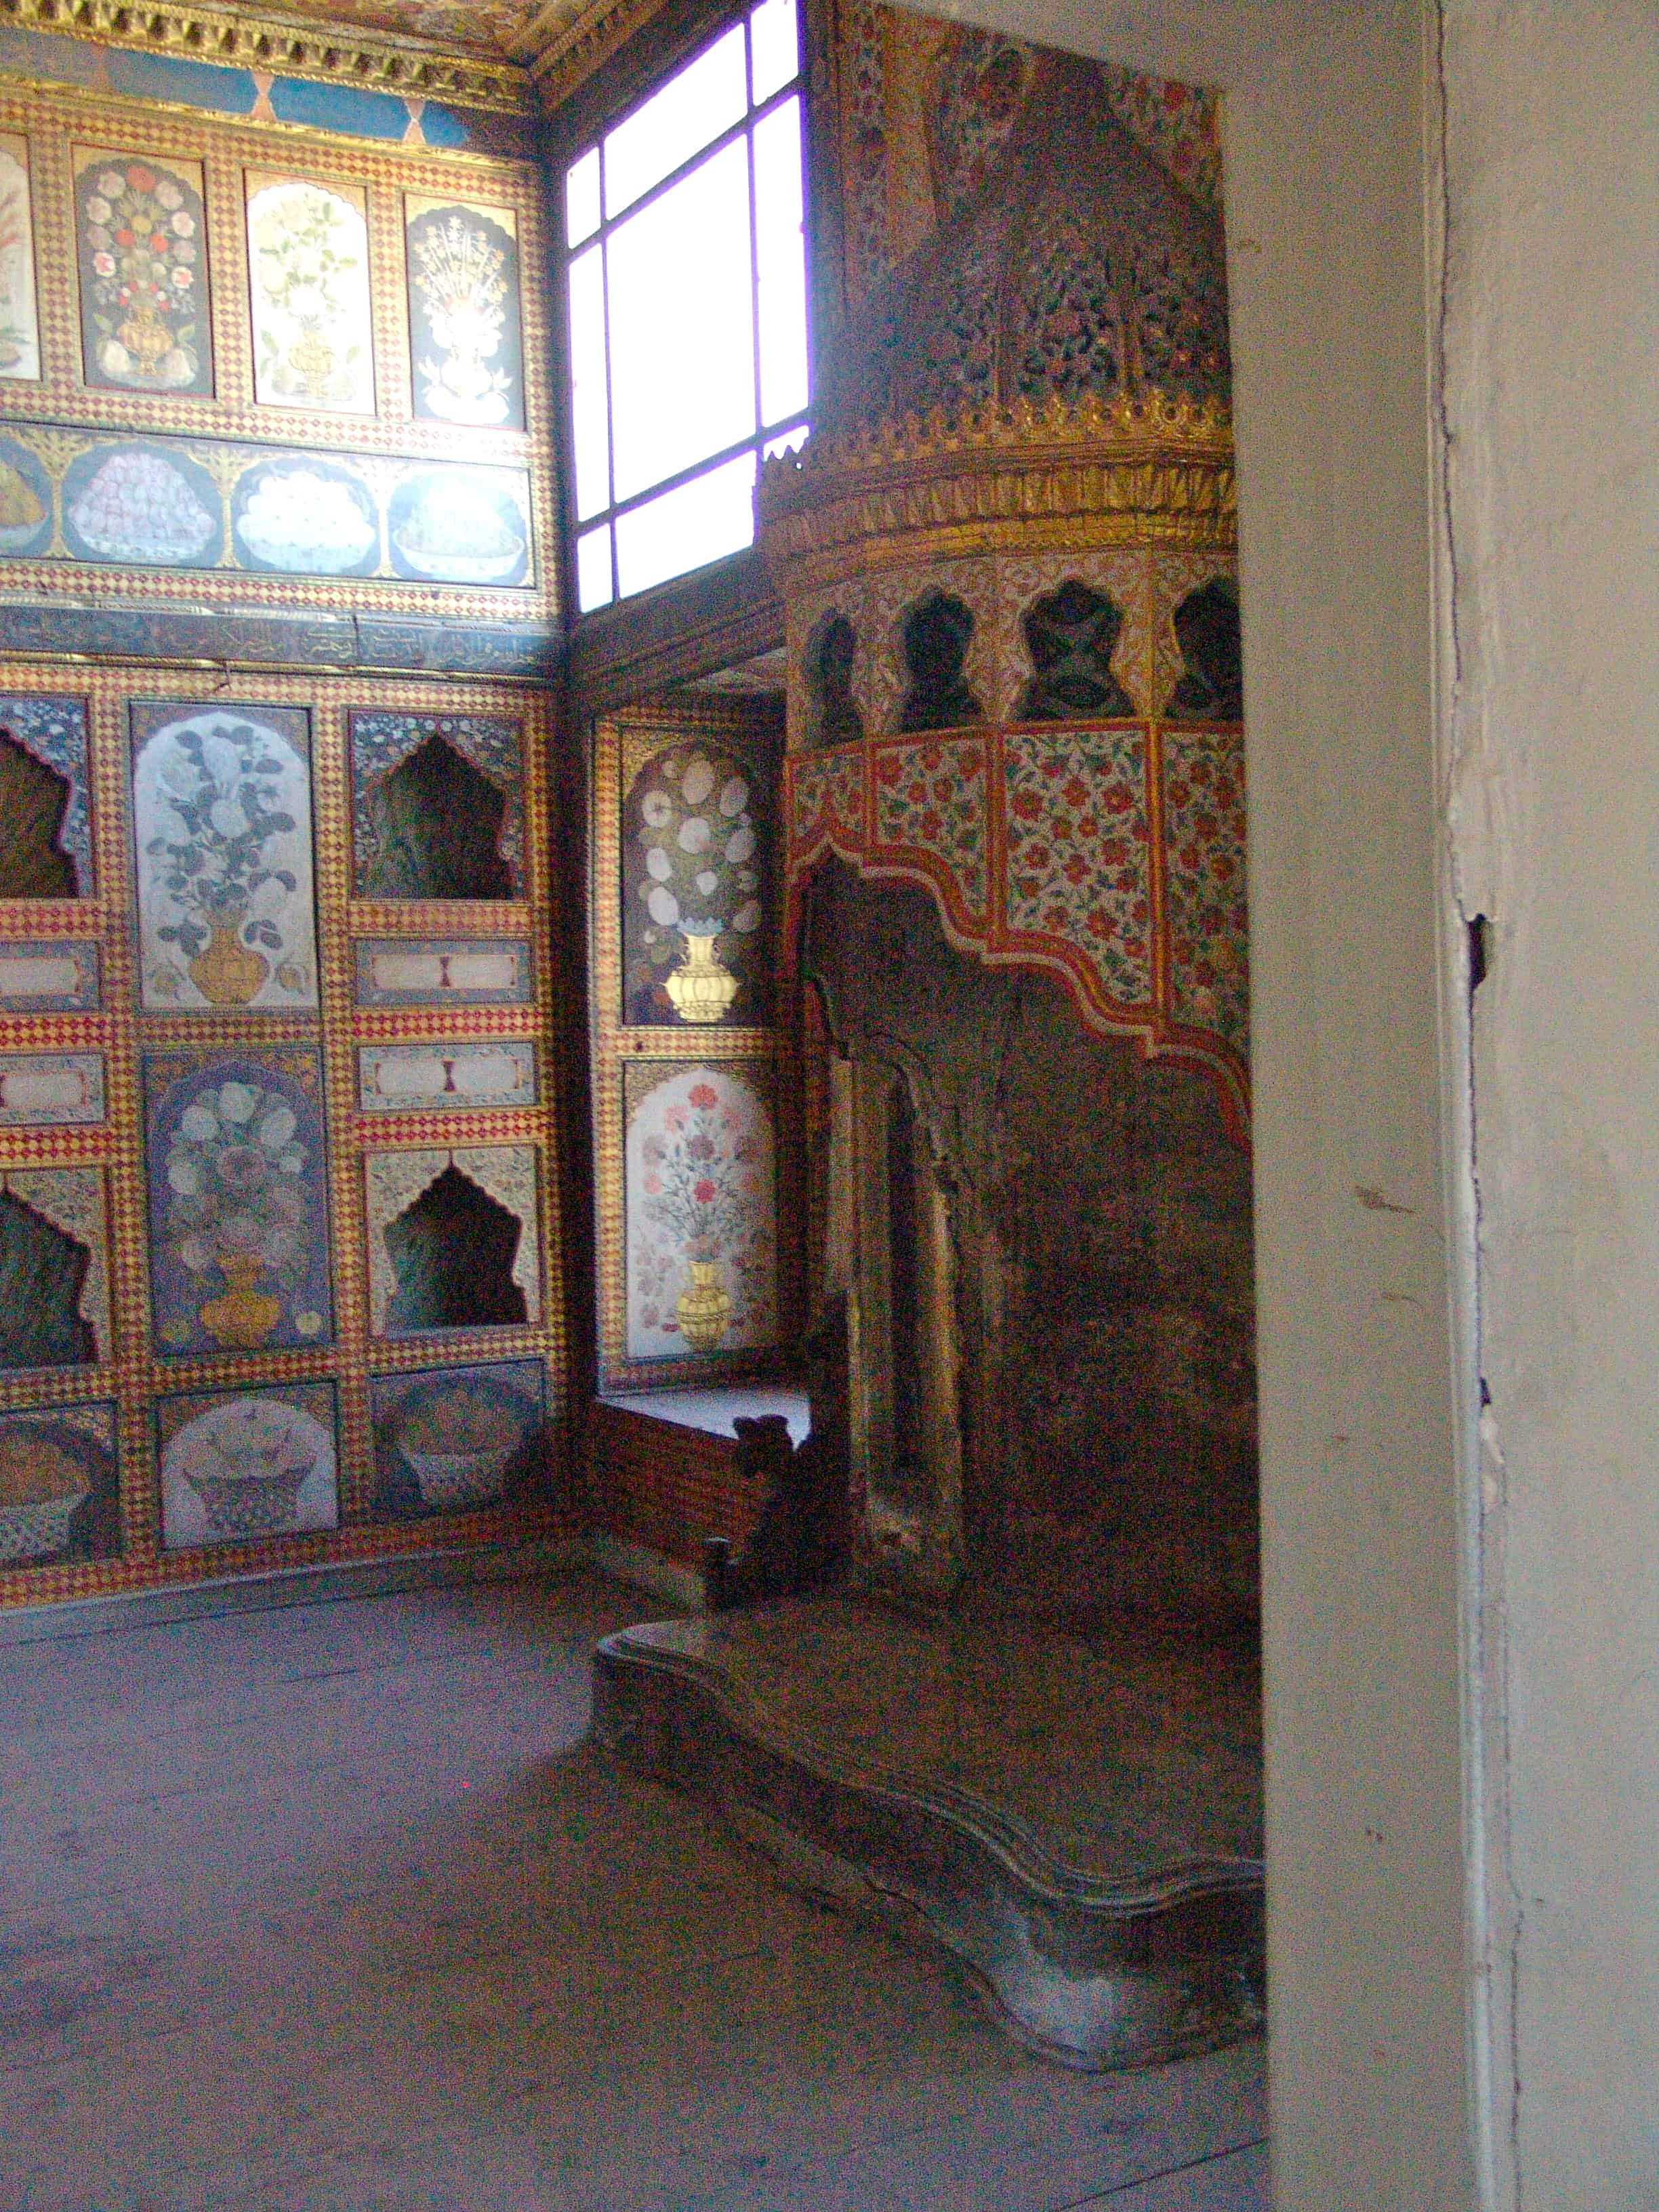 Privy Chamber of Ahmed III in the Imperial Harem at Topkapi Palace in Istanbul, Turkey